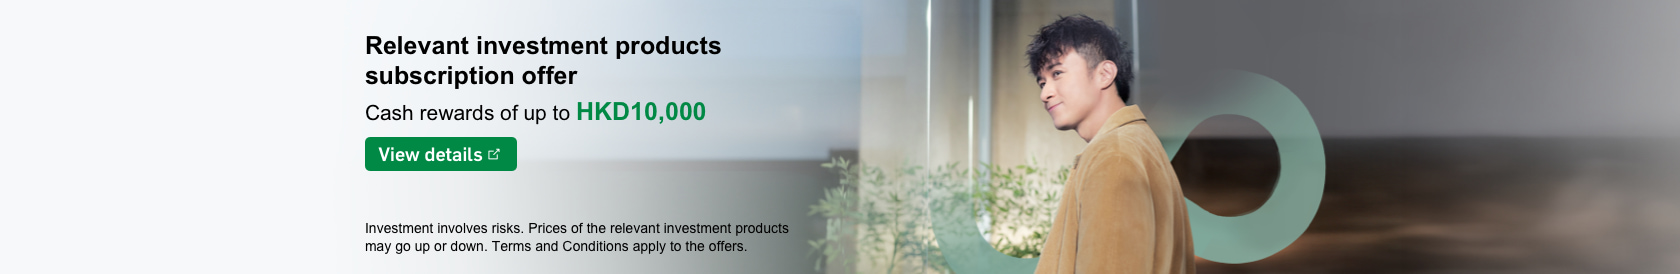 Relevant investment products subscription offer Cash rewards of up to HKD15,000